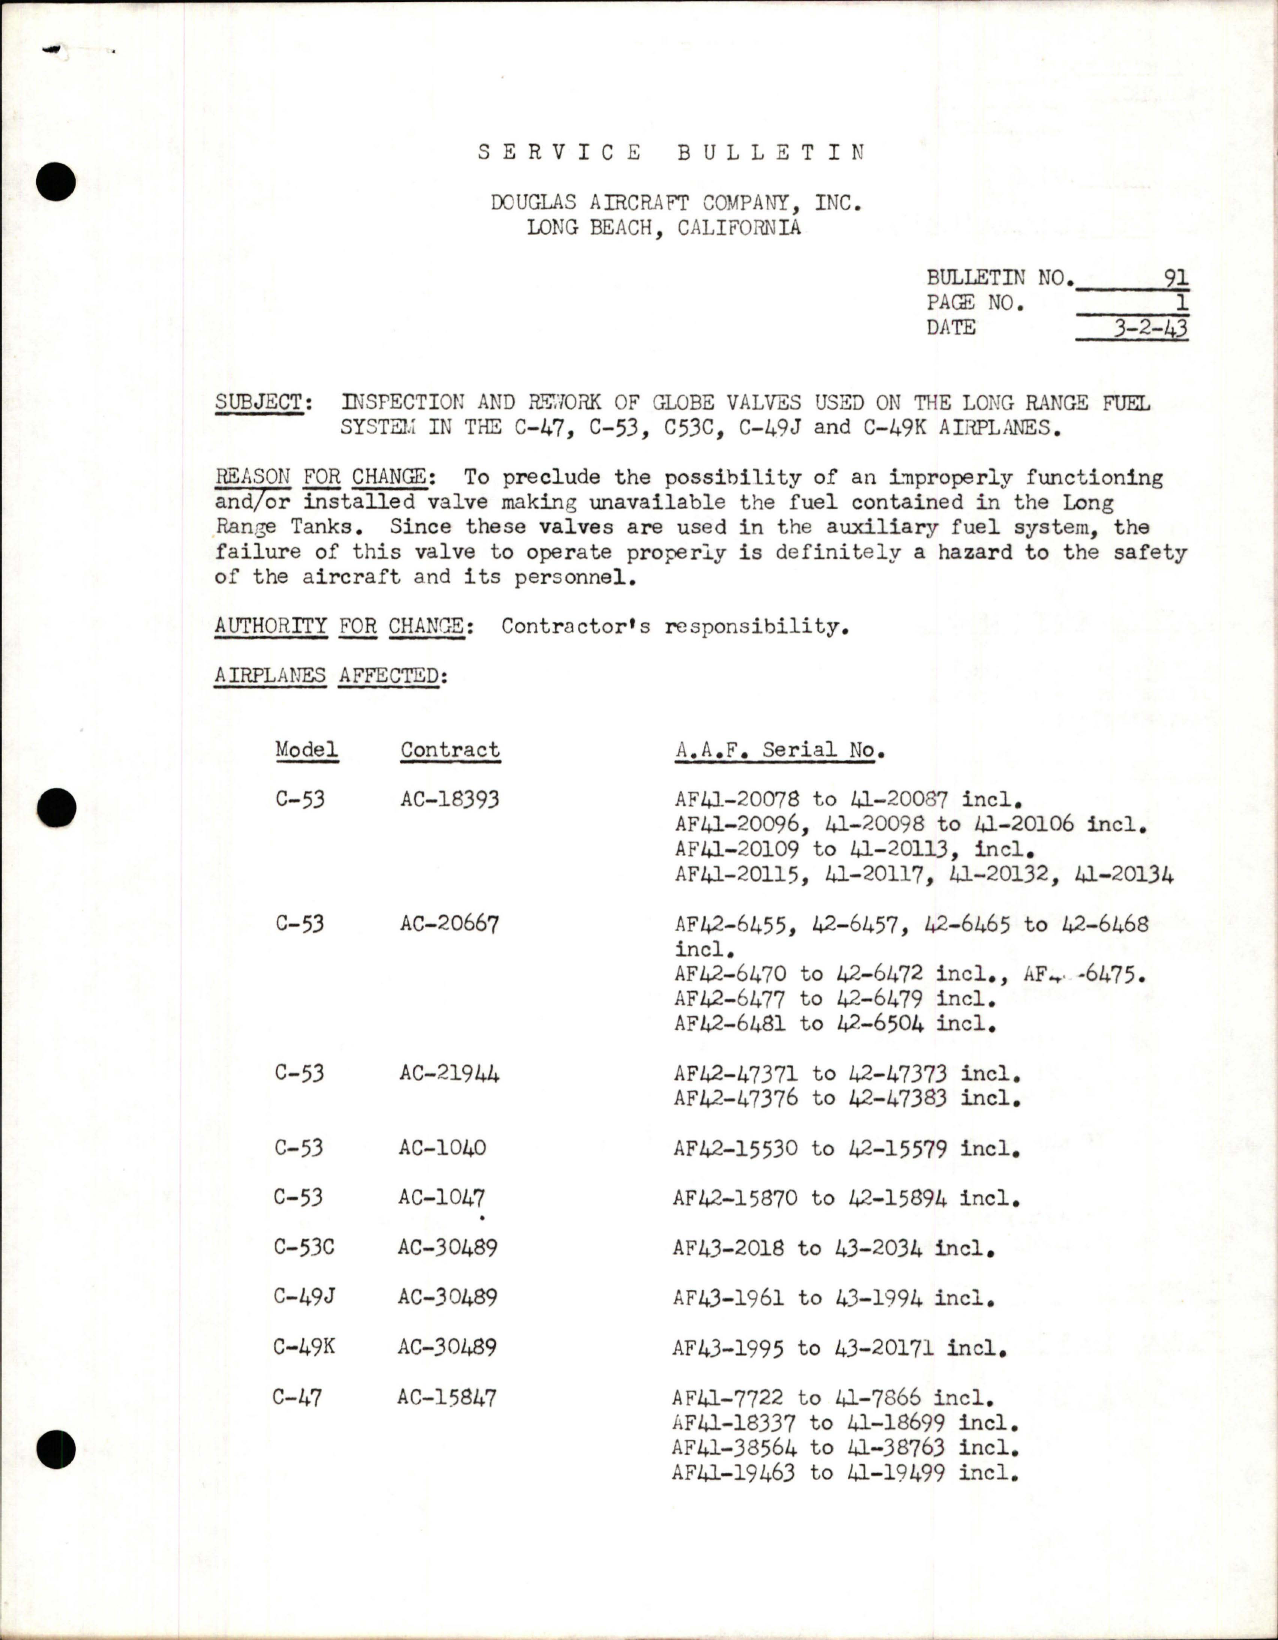 Sample page 1 from AirCorps Library document: Inspection and Rework of Globe Valves Used on the Long Range Fuel System